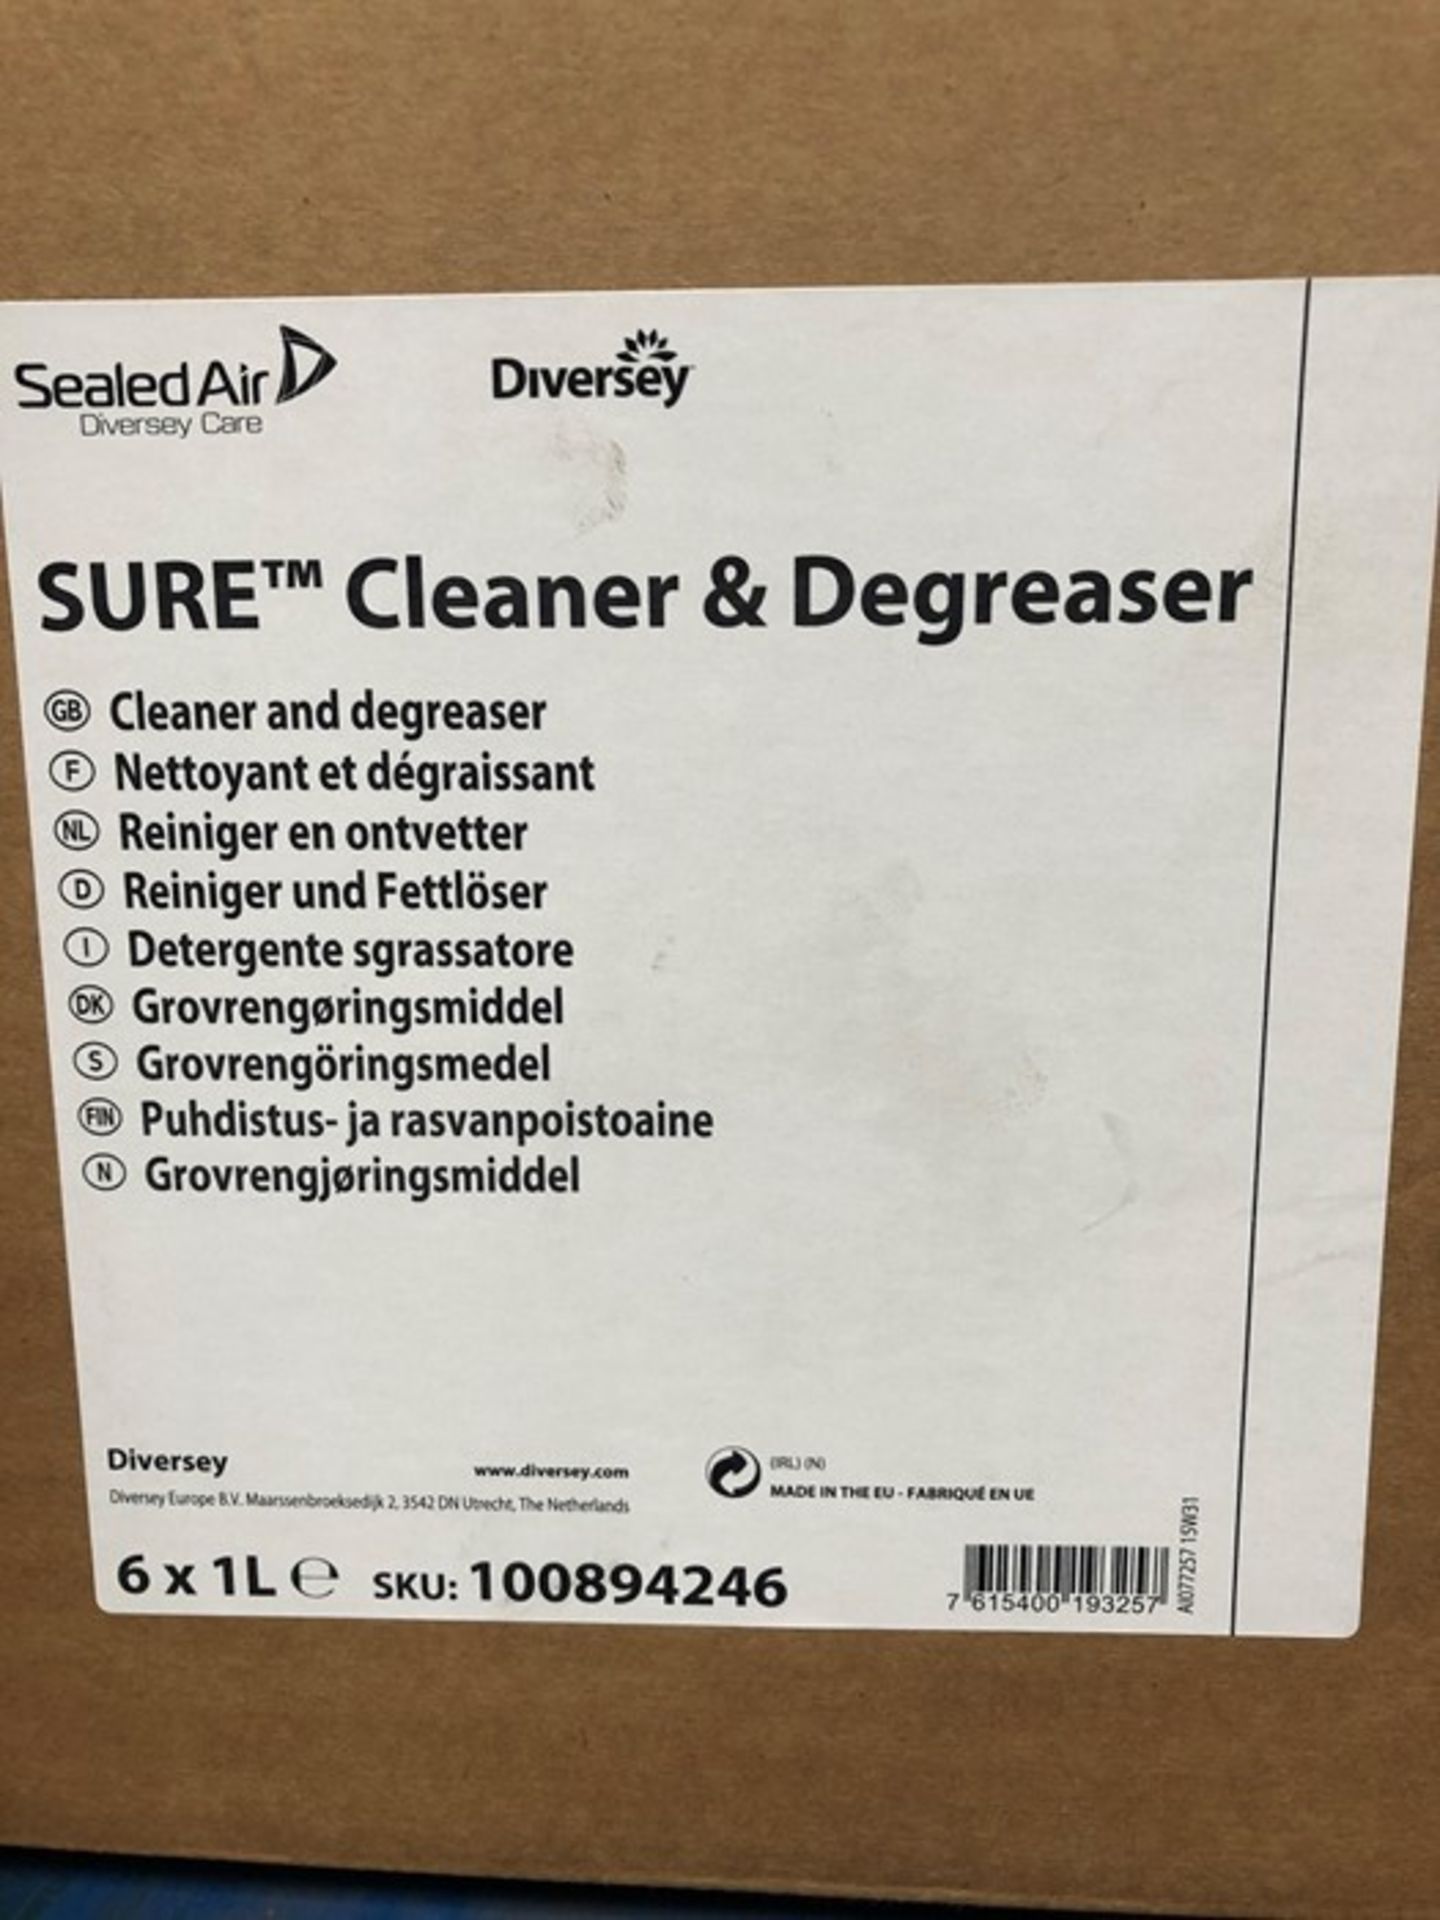 1 LOT TO CONTAIN 3 X BOXES OF SURE CLEANER & DEGREASER - 6 X 1L PER BOTTLE